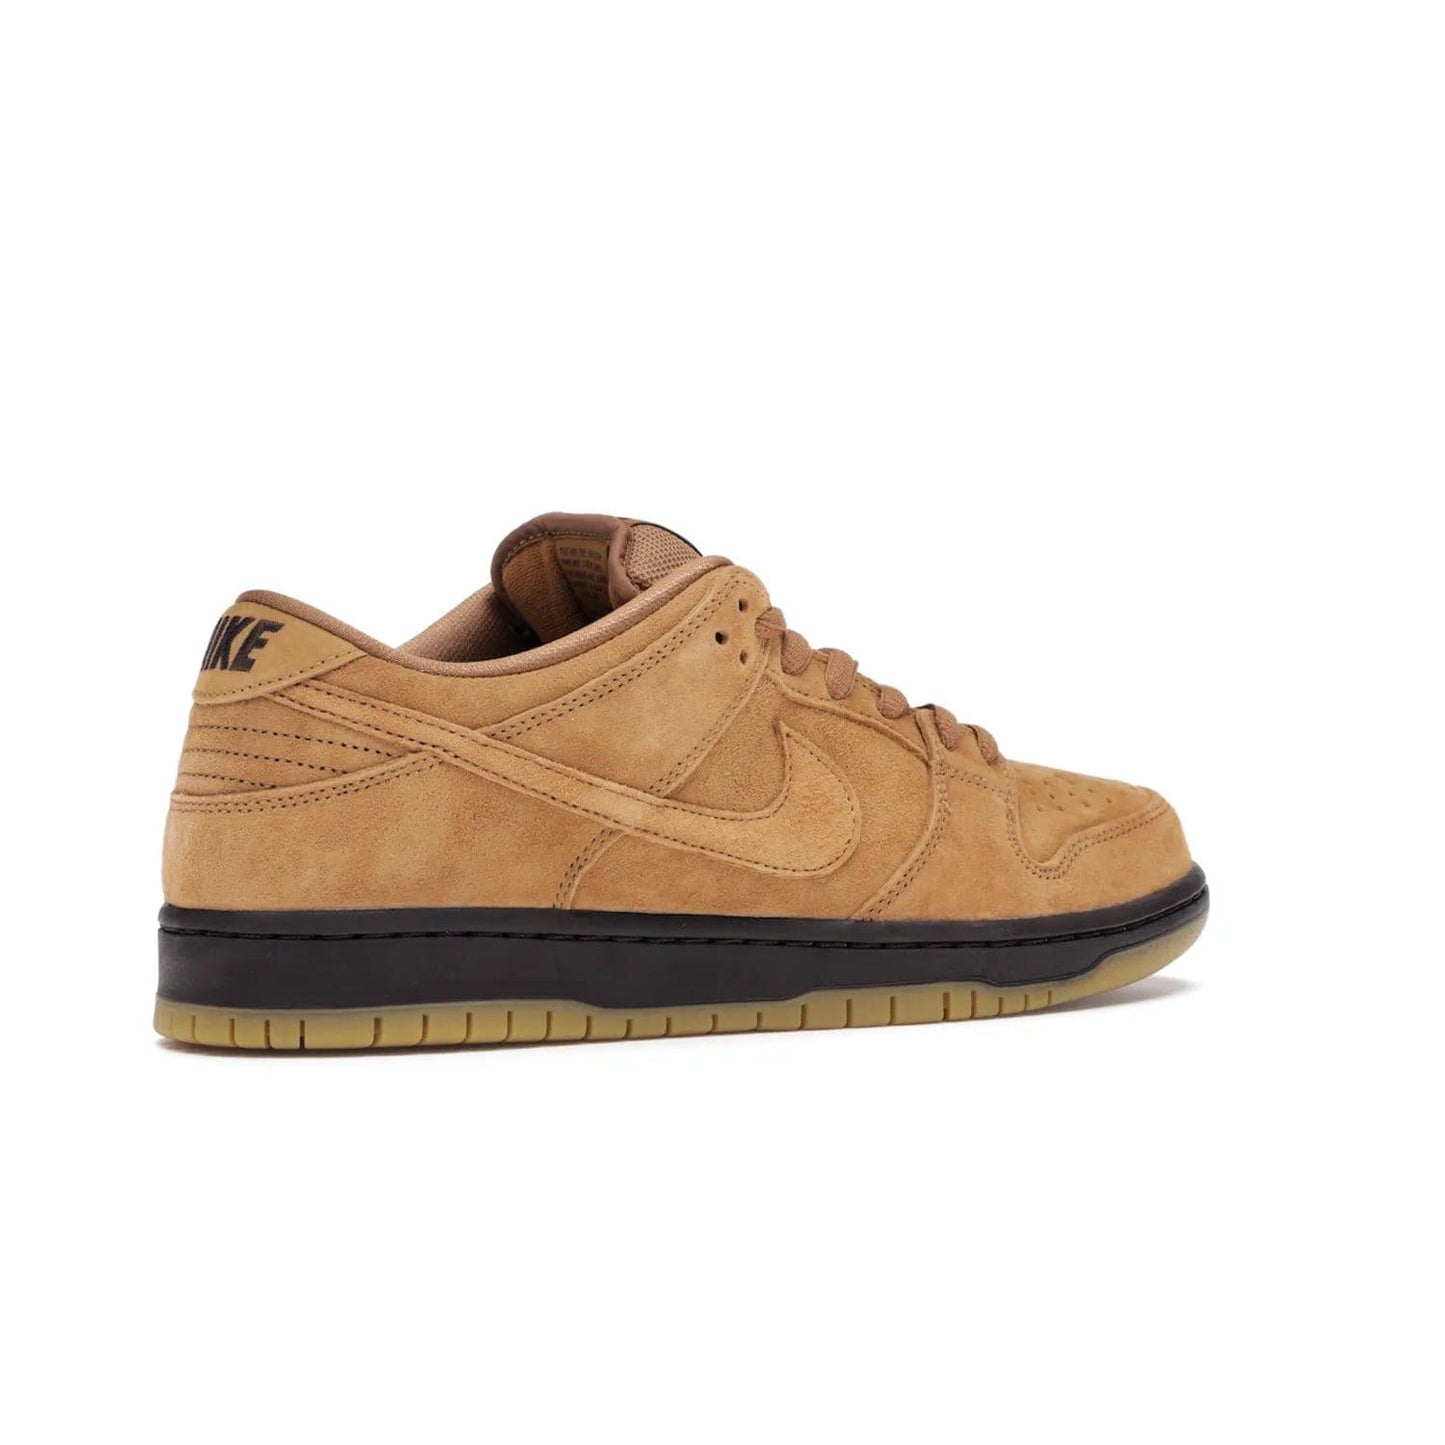 Nike SB Dunk Low Wheat (2021/2023) - Image 34 - Only at www.BallersClubKickz.com - The Nike SB Dunk Low Wheat (2021/2023)has a sleek silhouette and wheat suede upper. Tan tones for lining, mesh tongues, and laces. Iconic color palette midsole, perforated boxing toe. Brown branding on tongue and heel. Gum rubber outsole with partitioned pattern for traction. Eschewed in Feb 2021 for $110.